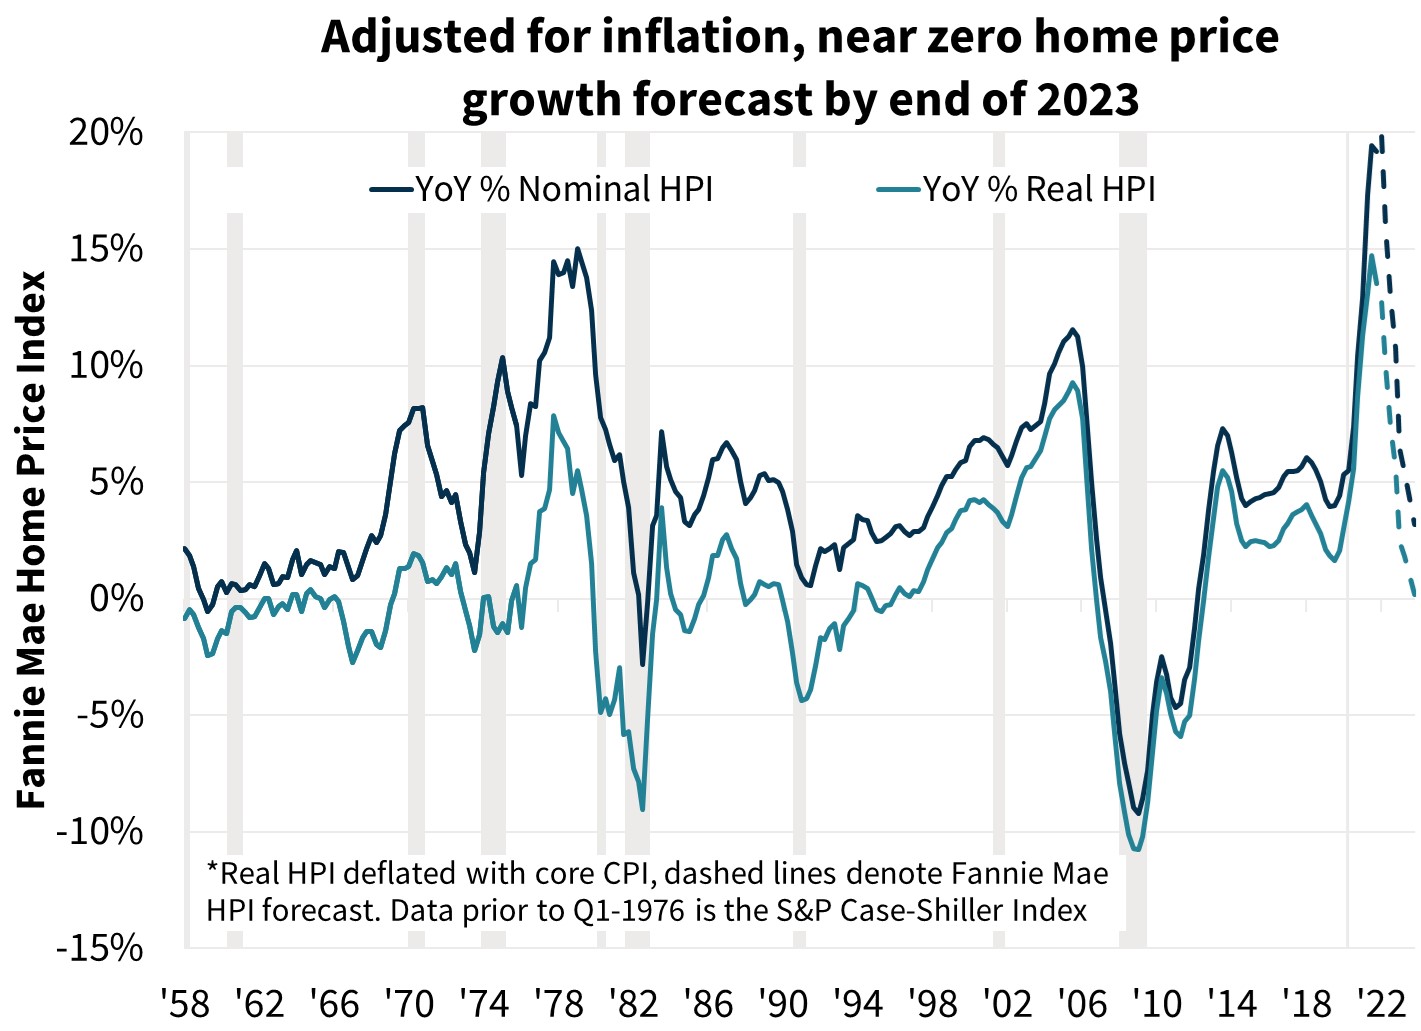  Adjusted for inflation, near zero home price growth forecast by end of 2023